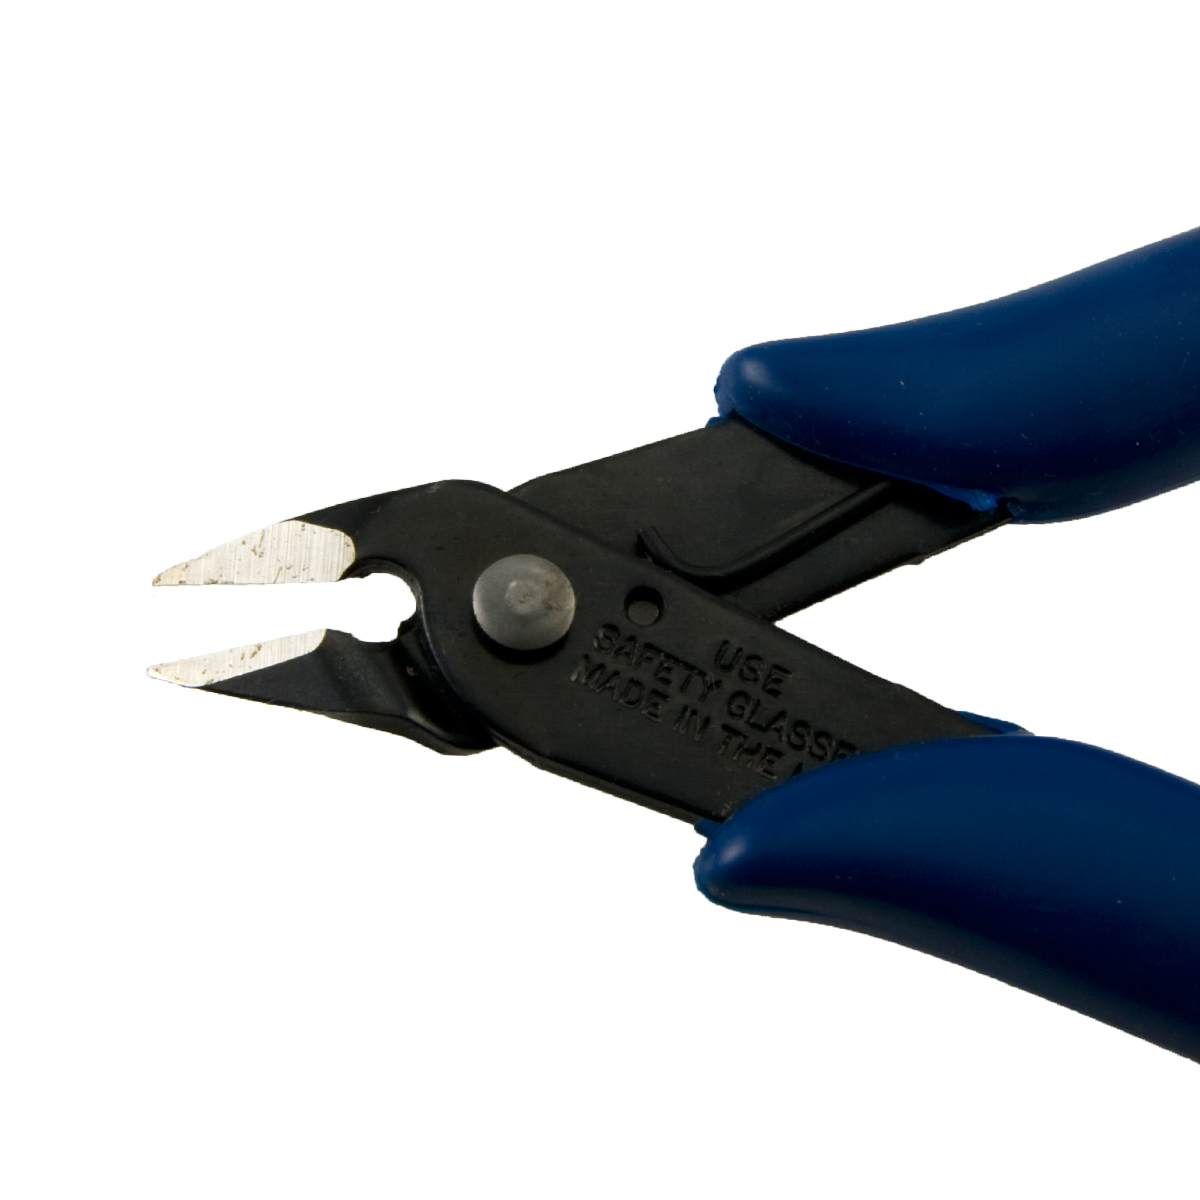 5 inch Plato Slim Flush Cutters for Wire Working or Beading - Pack